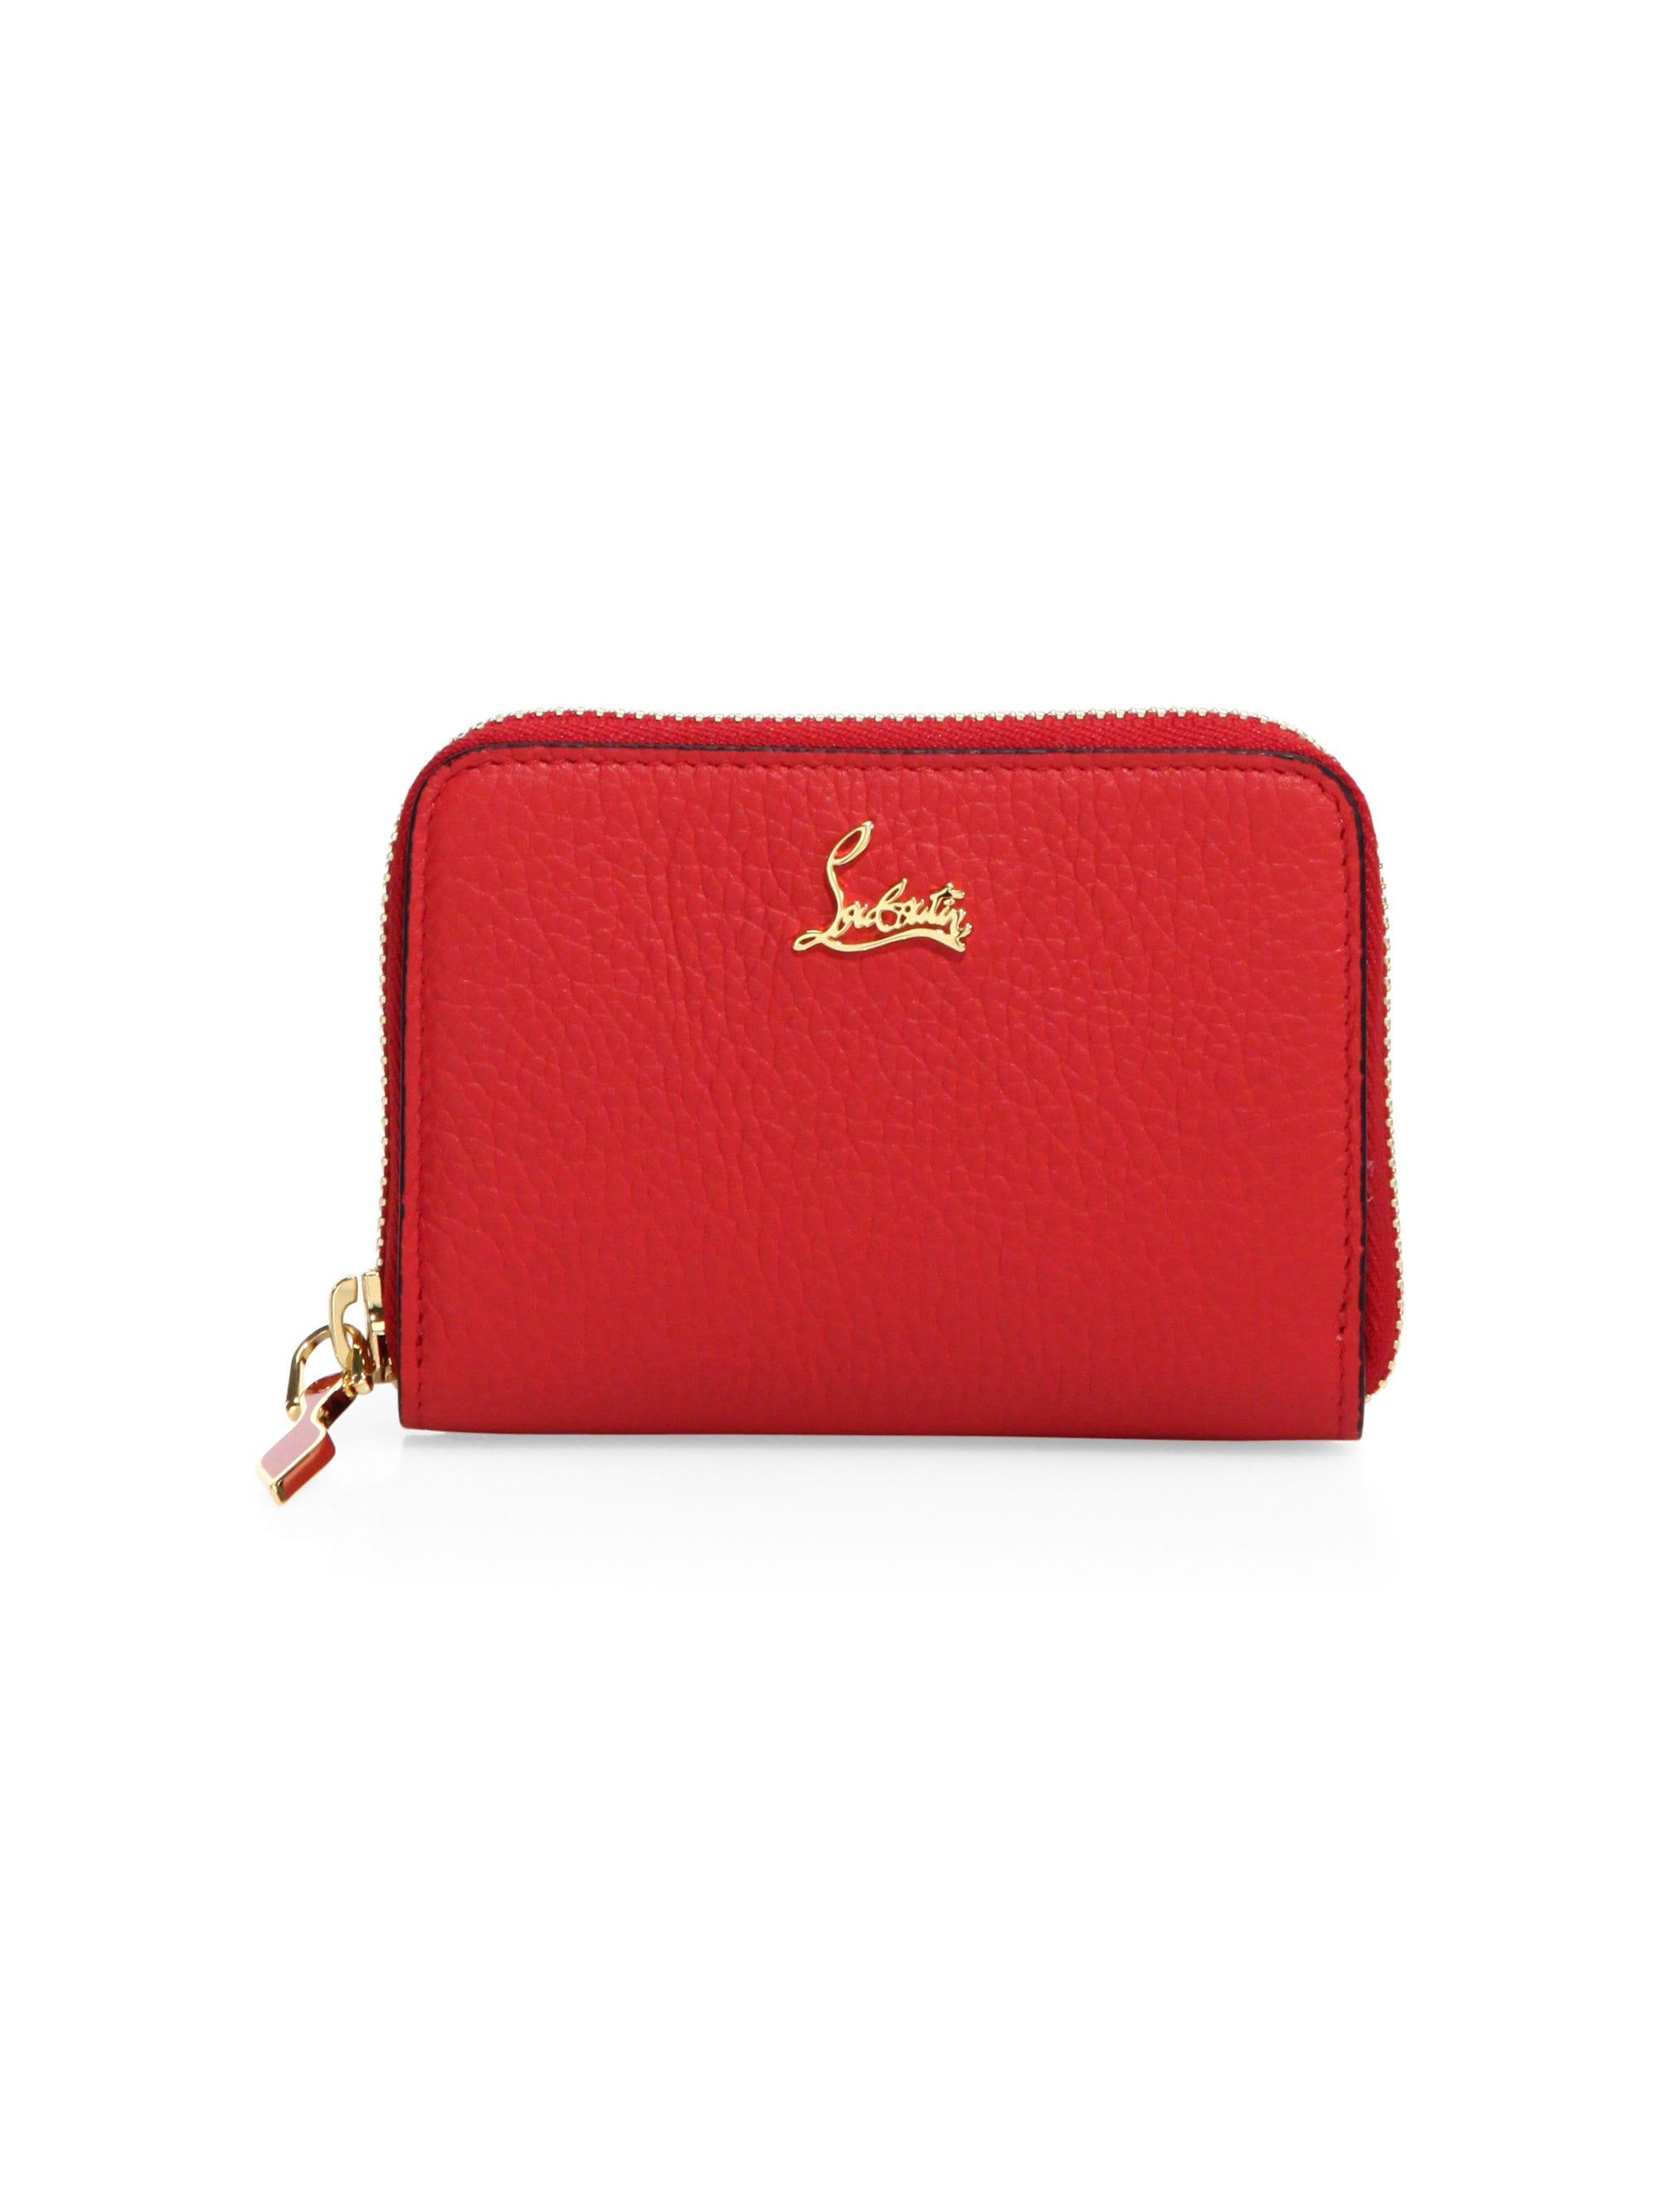 Christian Louboutin Panettone Coin Purse in Red - Lyst